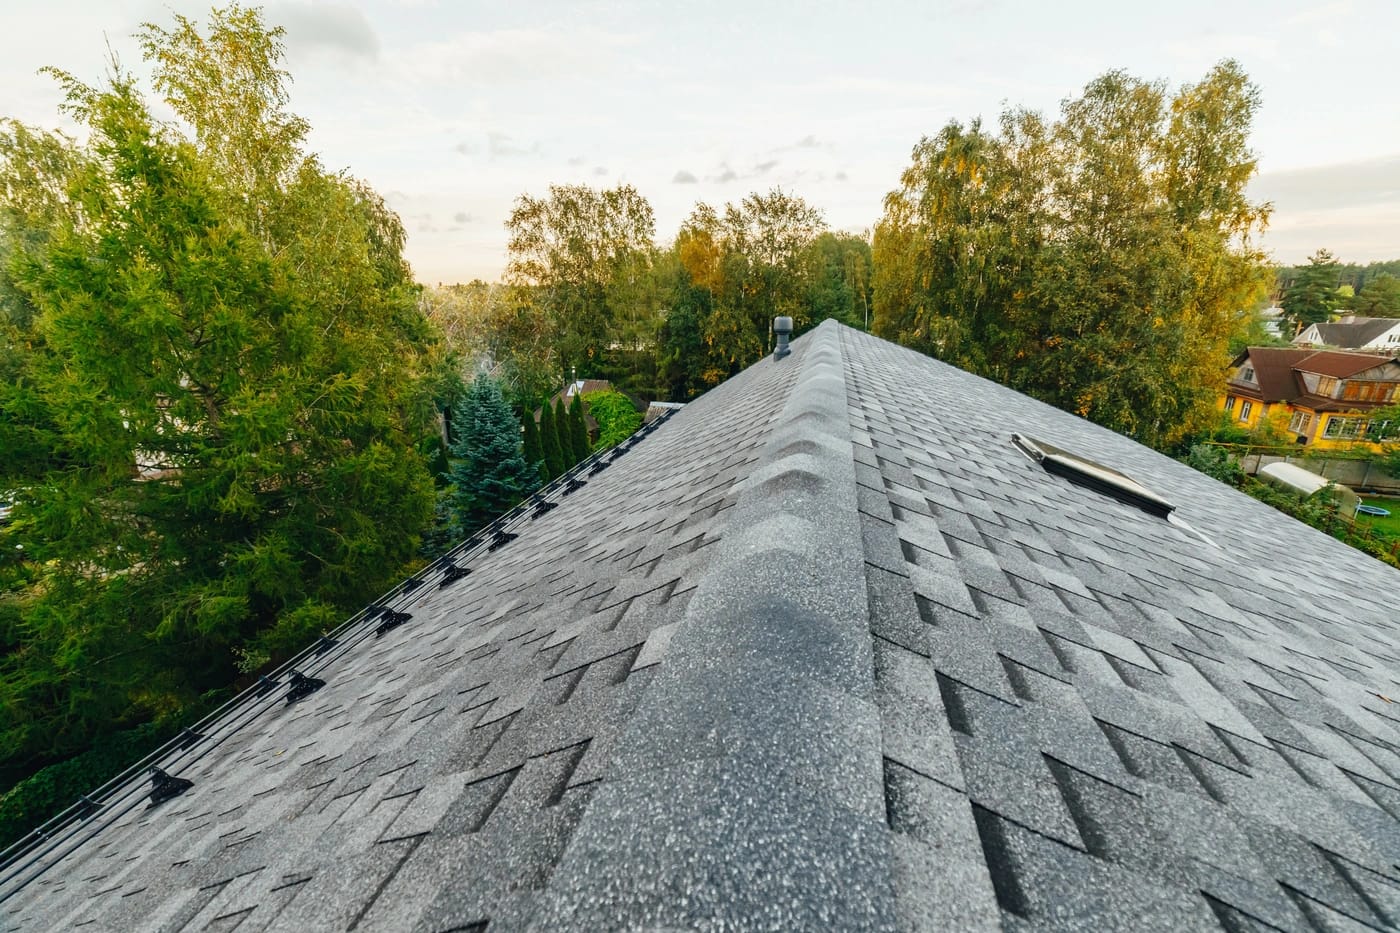 Ridge view of new storm damage roof repairs on shingle roof in Silverdale, WA